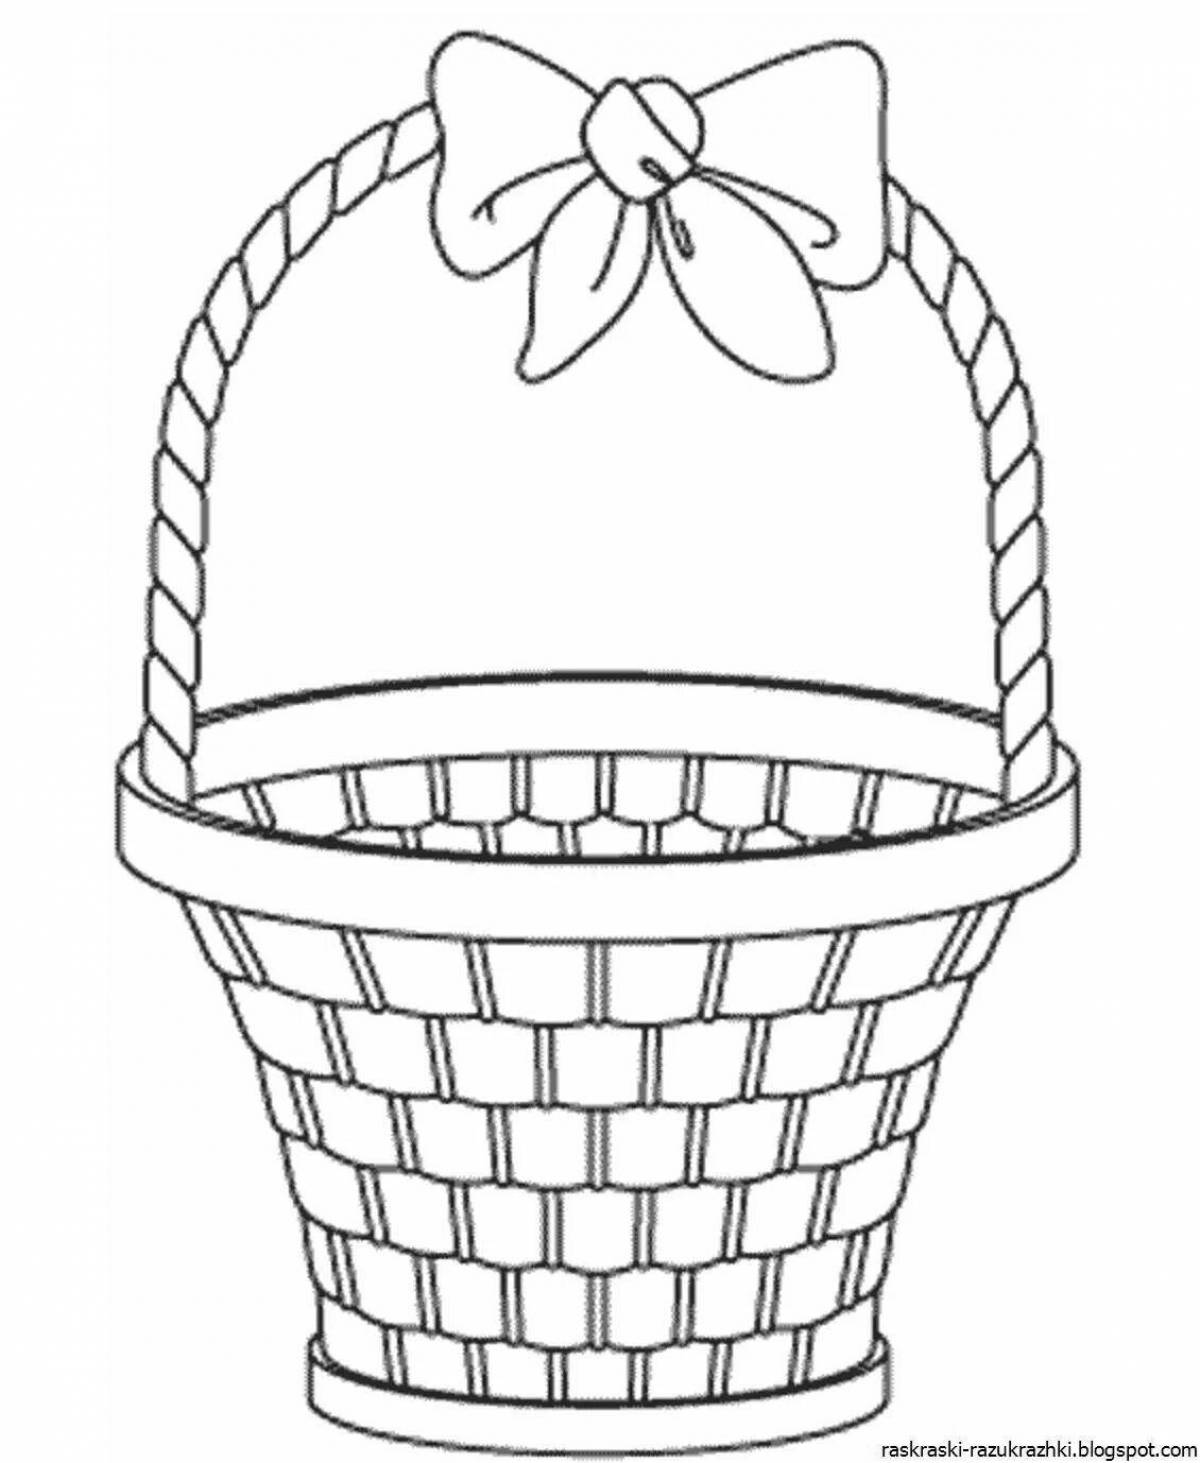 Amazing empty basket coloring book for kids